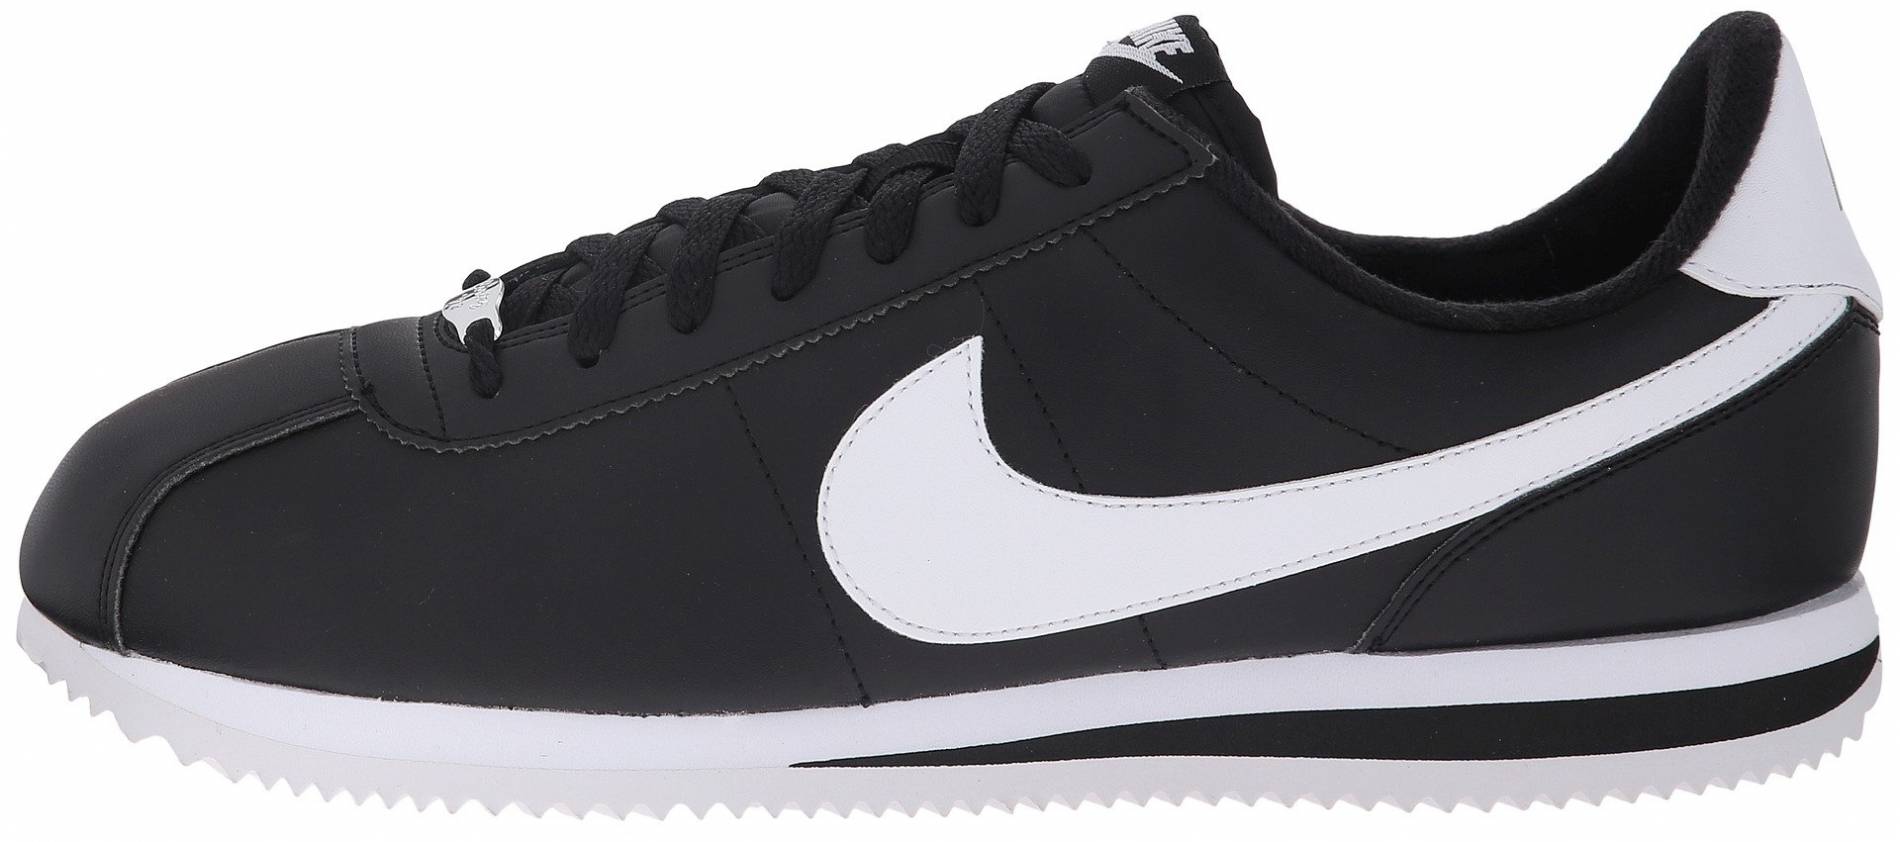 Nike Cortez Leather All Black Online Sale, UP TO 51% OFF